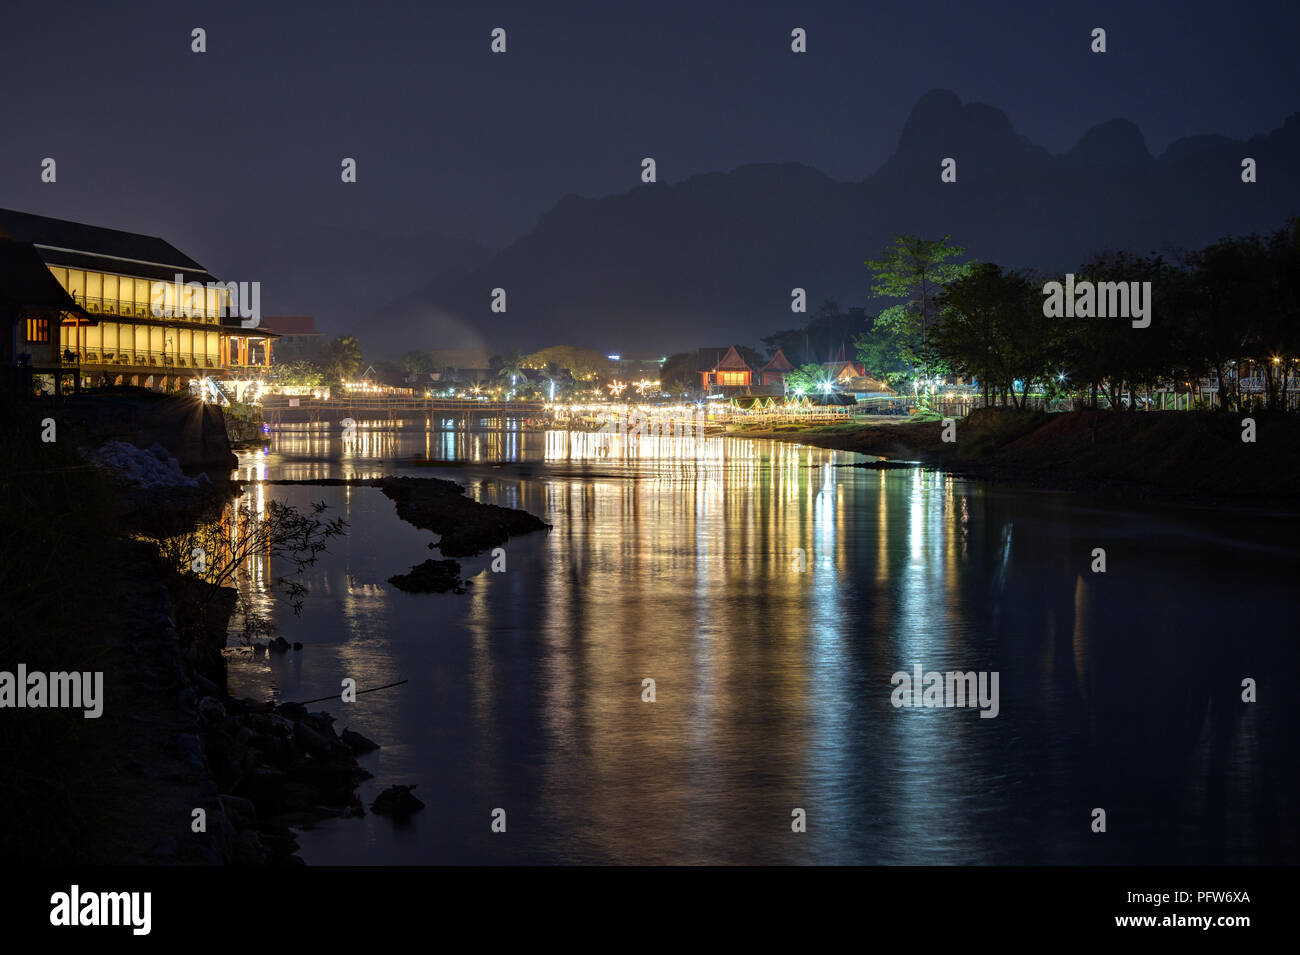 Silhouette of karst limestone mountains and reflections of lit waterfront restaurants by the the Nam Song River in Vang Vieng, Laos, at night. Stock Photo